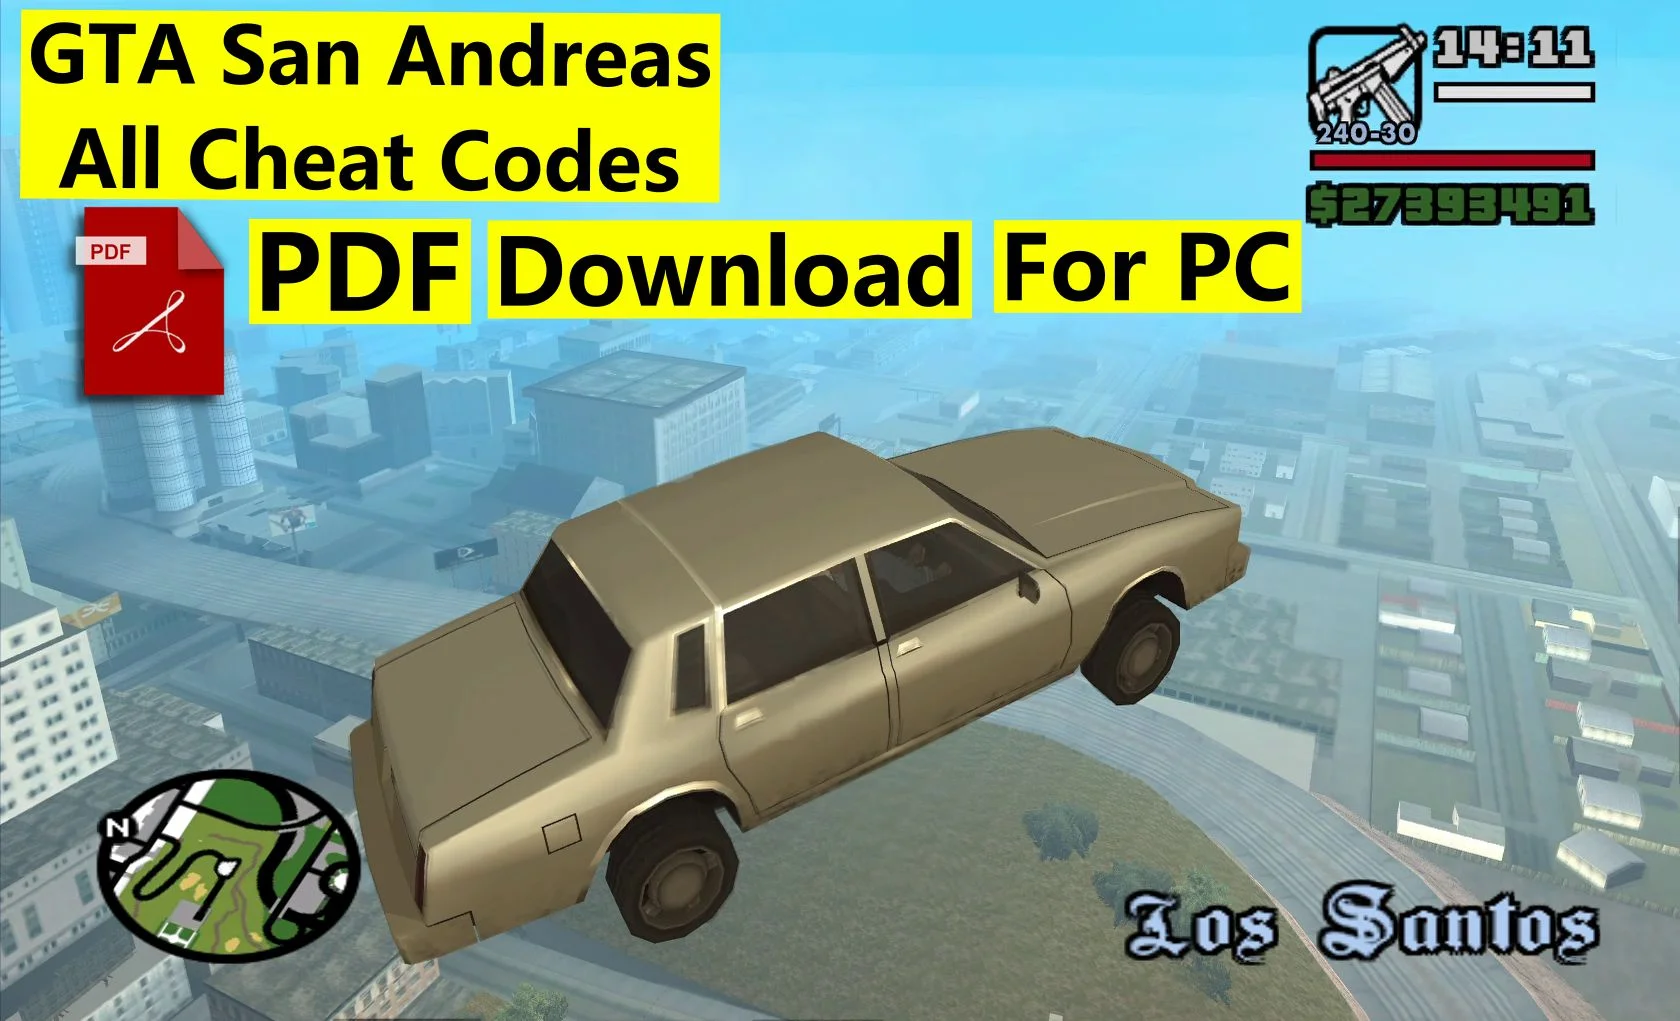 GTA San Andreas List of Cheat Codes For PC and Laptop, PDF, Transport